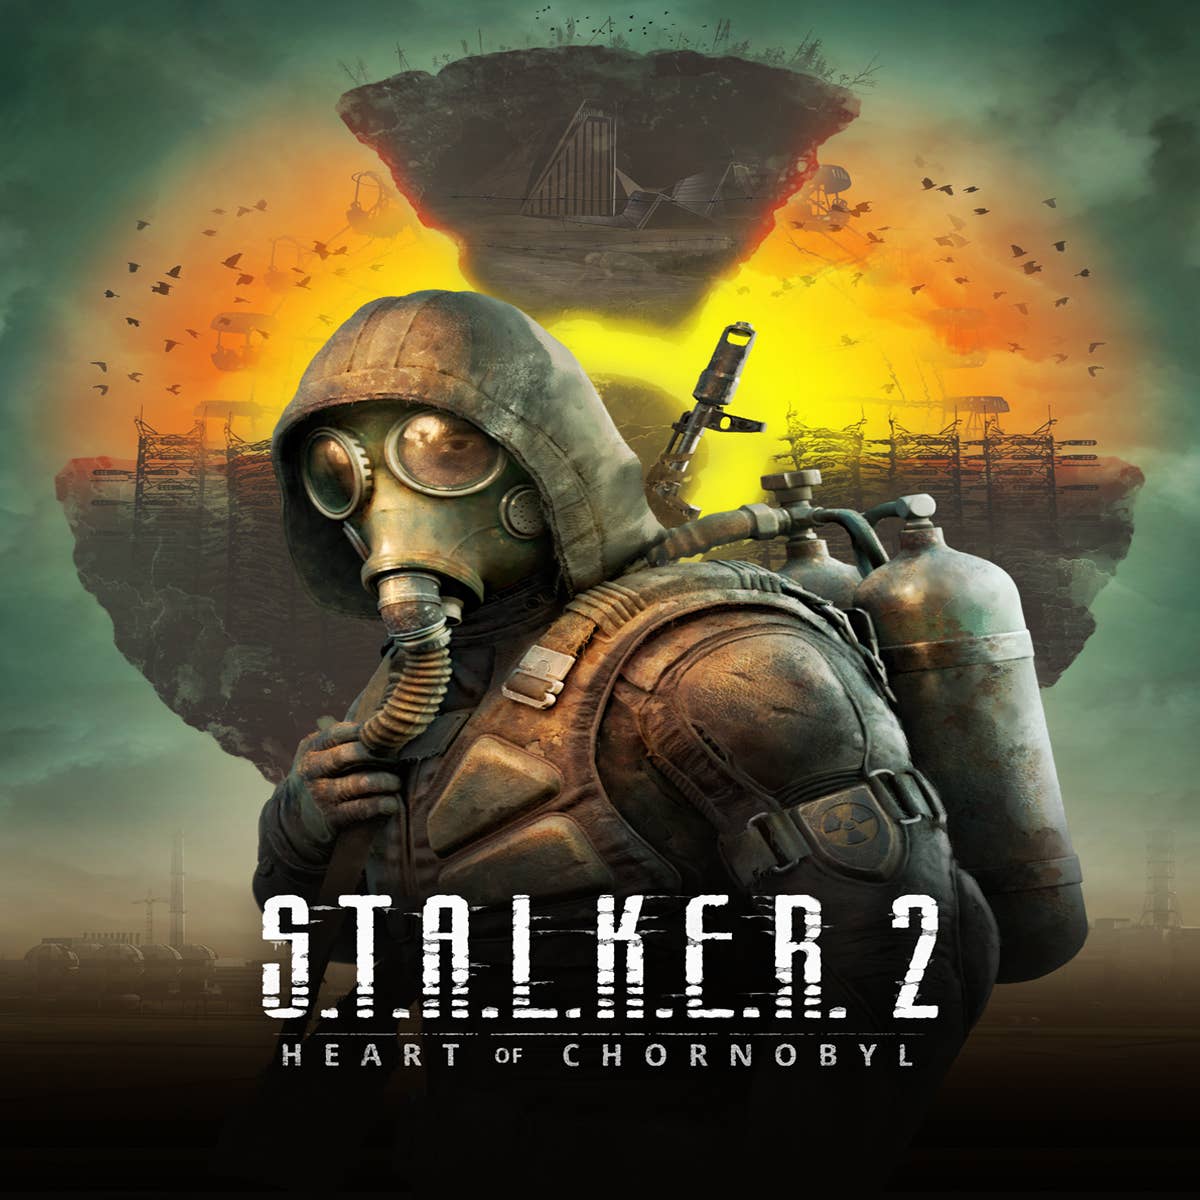 STALKER 2 shows off life in The Zone in its new trailer, confirms